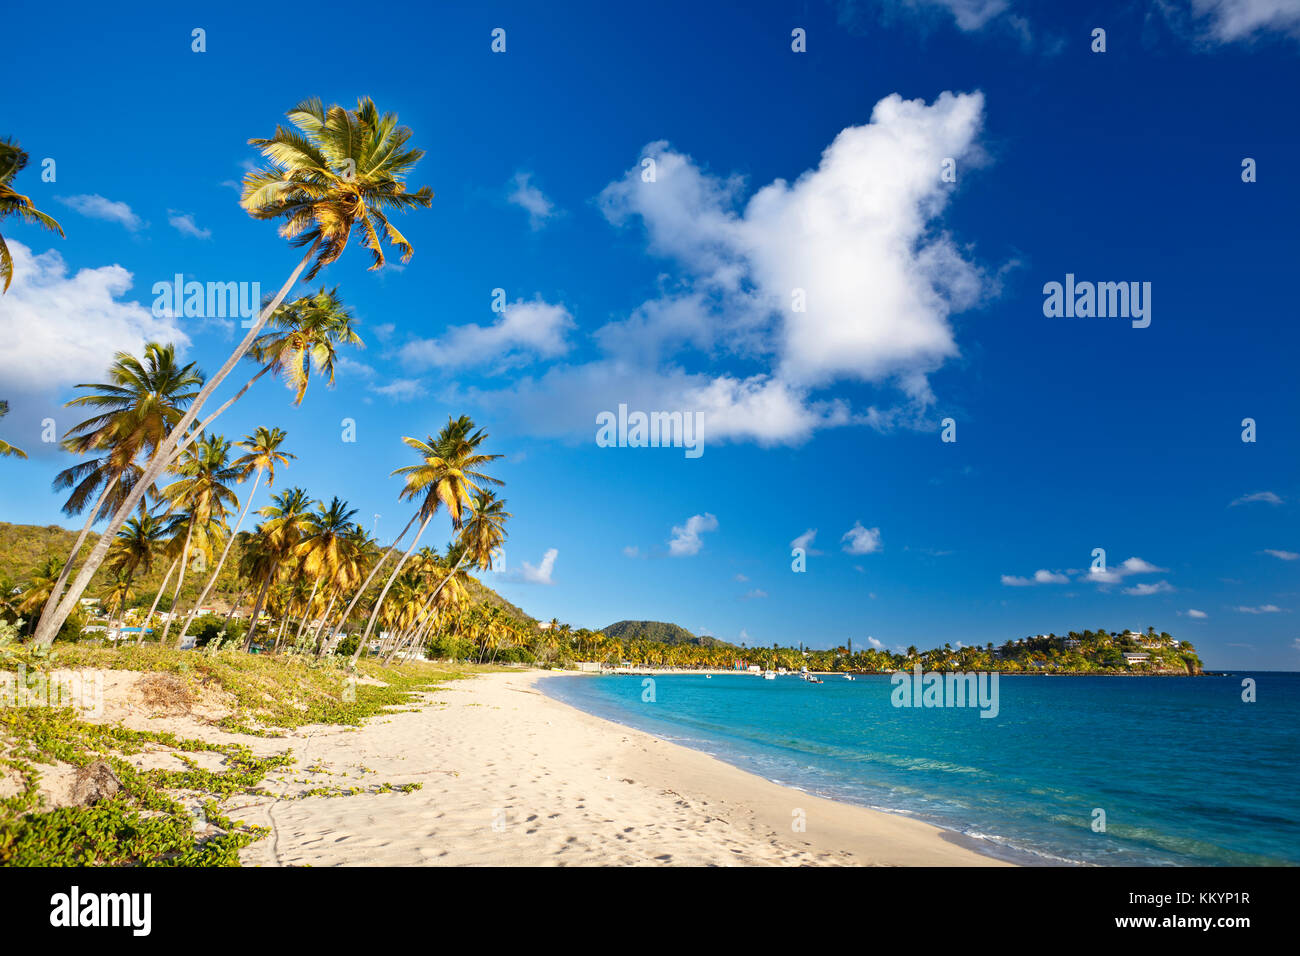 A beautiful caribbean beach in Antigua with palm trees and blue sky. Stock Photo